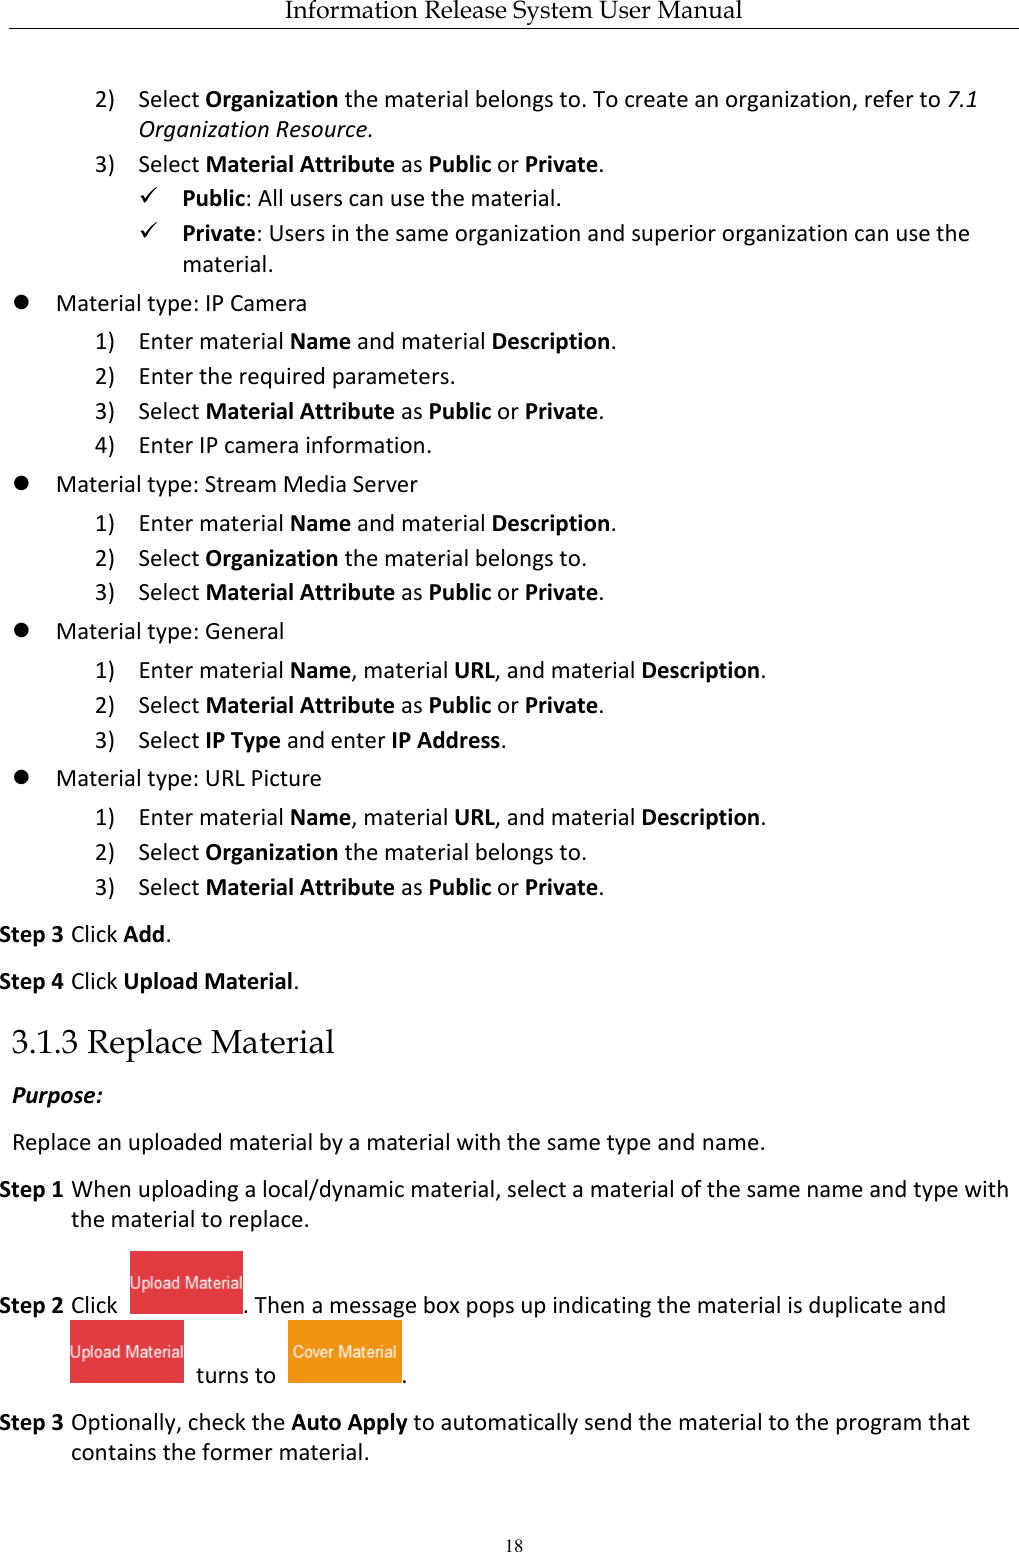 Information Release System User Manual 18 2) Select Organization the material belongs to. To create an organization, refer to 7.1 Organization Resource. 3) Select Material Attribute as Public or Private.  Public: All users can use the material.  Private: Users in the same organization and superior organization can use the material.  Material type: IP Camera 1) Enter material Name and material Description. 2) Enter the required parameters. 3) Select Material Attribute as Public or Private. 4) Enter IP camera information.  Material type: Stream Media Server 1) Enter material Name and material Description. 2) Select Organization the material belongs to. 3) Select Material Attribute as Public or Private.  Material type: General 1) Enter material Name, material URL, and material Description. 2) Select Material Attribute as Public or Private. 3) Select IP Type and enter IP Address.  Material type: URL Picture 1) Enter material Name, material URL, and material Description. 2) Select Organization the material belongs to. 3) Select Material Attribute as Public or Private. Step 3 Click Add. Step 4 Click Upload Material. 3.1.3 Replace Material Purpose: Replace an uploaded material by a material with the same type and name.   Step 1 When uploading a local/dynamic material, select a material of the same name and type with the material to replace.   Step 2 Click  . Then a message box pops up indicating the material is duplicate and   turns to  . Step 3 Optionally, check the Auto Apply to automatically send the material to the program that contains the former material. 